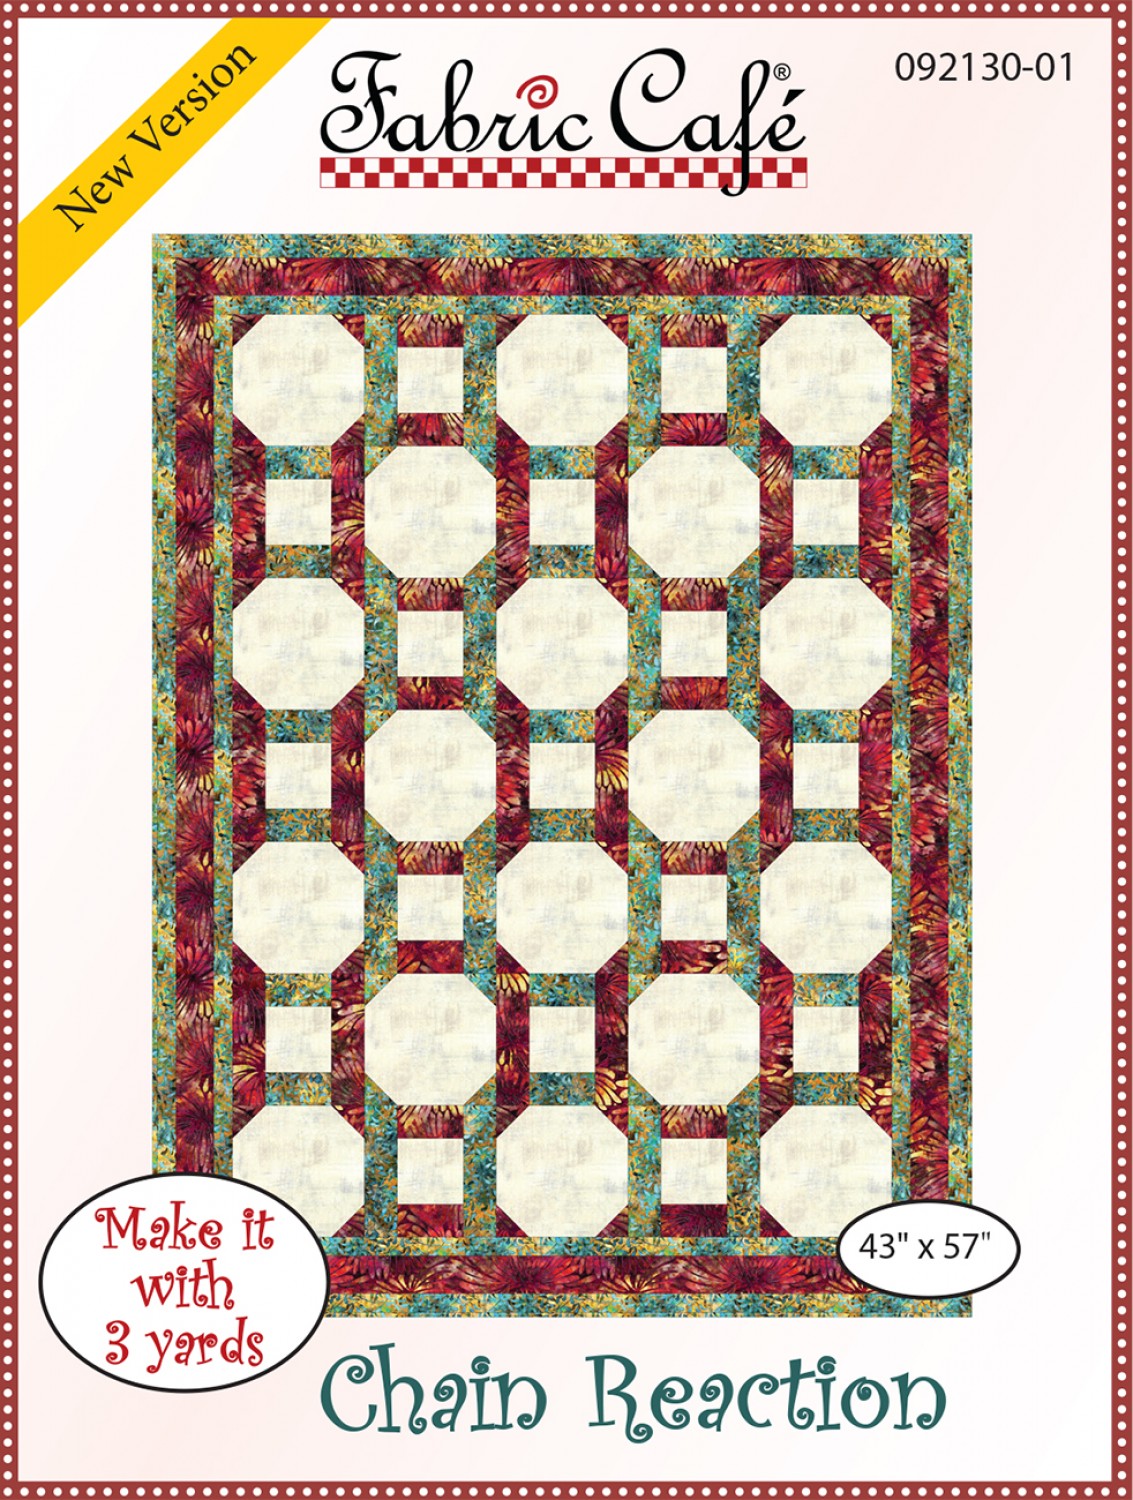 Chain Reaction - Quilt Pattern - Fabric Cafe